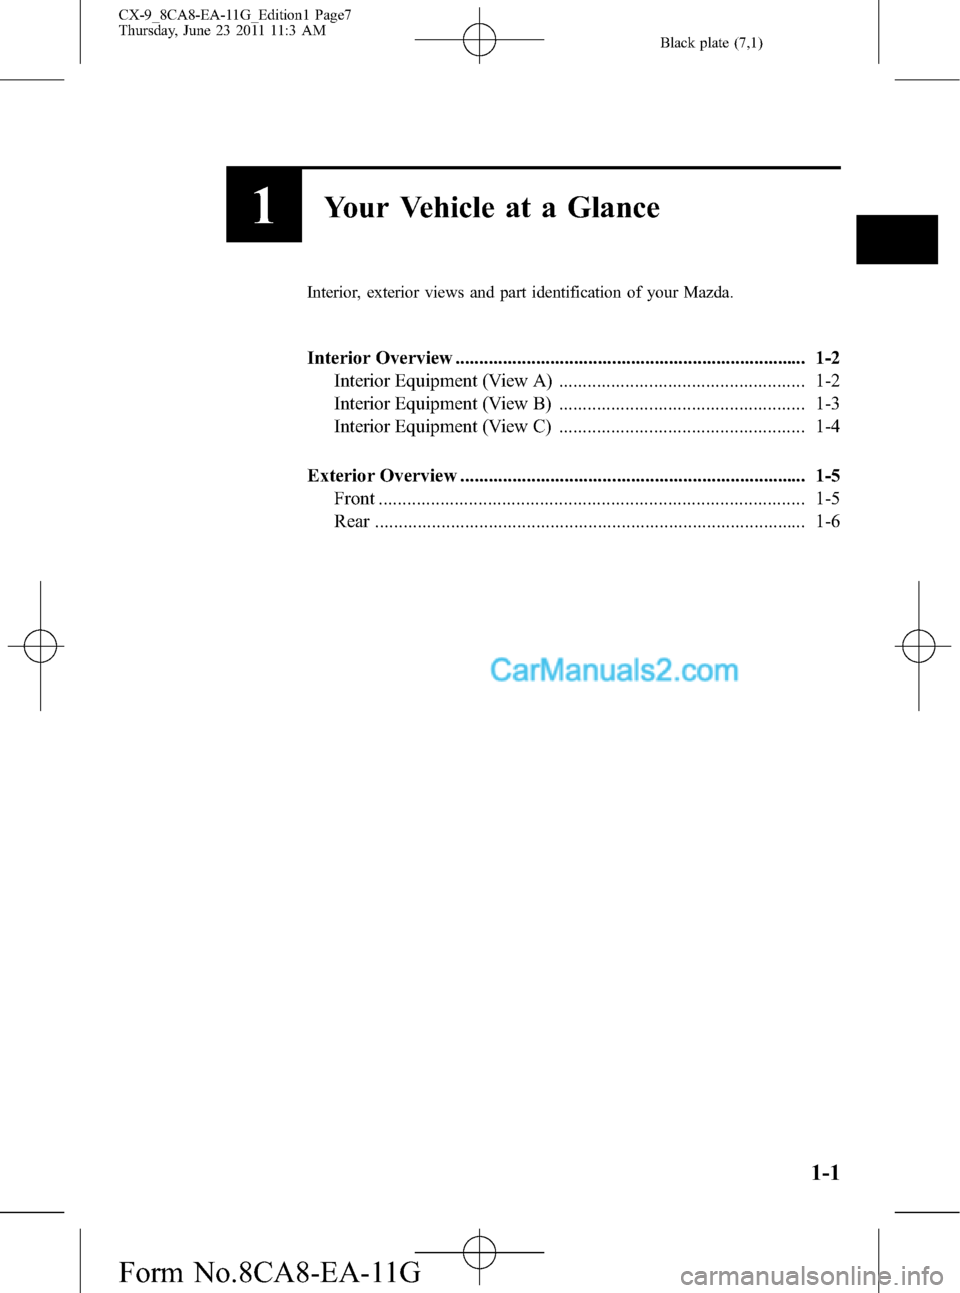 MAZDA MODEL CX-9 2012  Owners Manual (in English) Black plate (7,1)
1Your Vehicle at a Glance
Interior, exterior views and part identification of your Mazda.
Interior Overview ..........................................................................